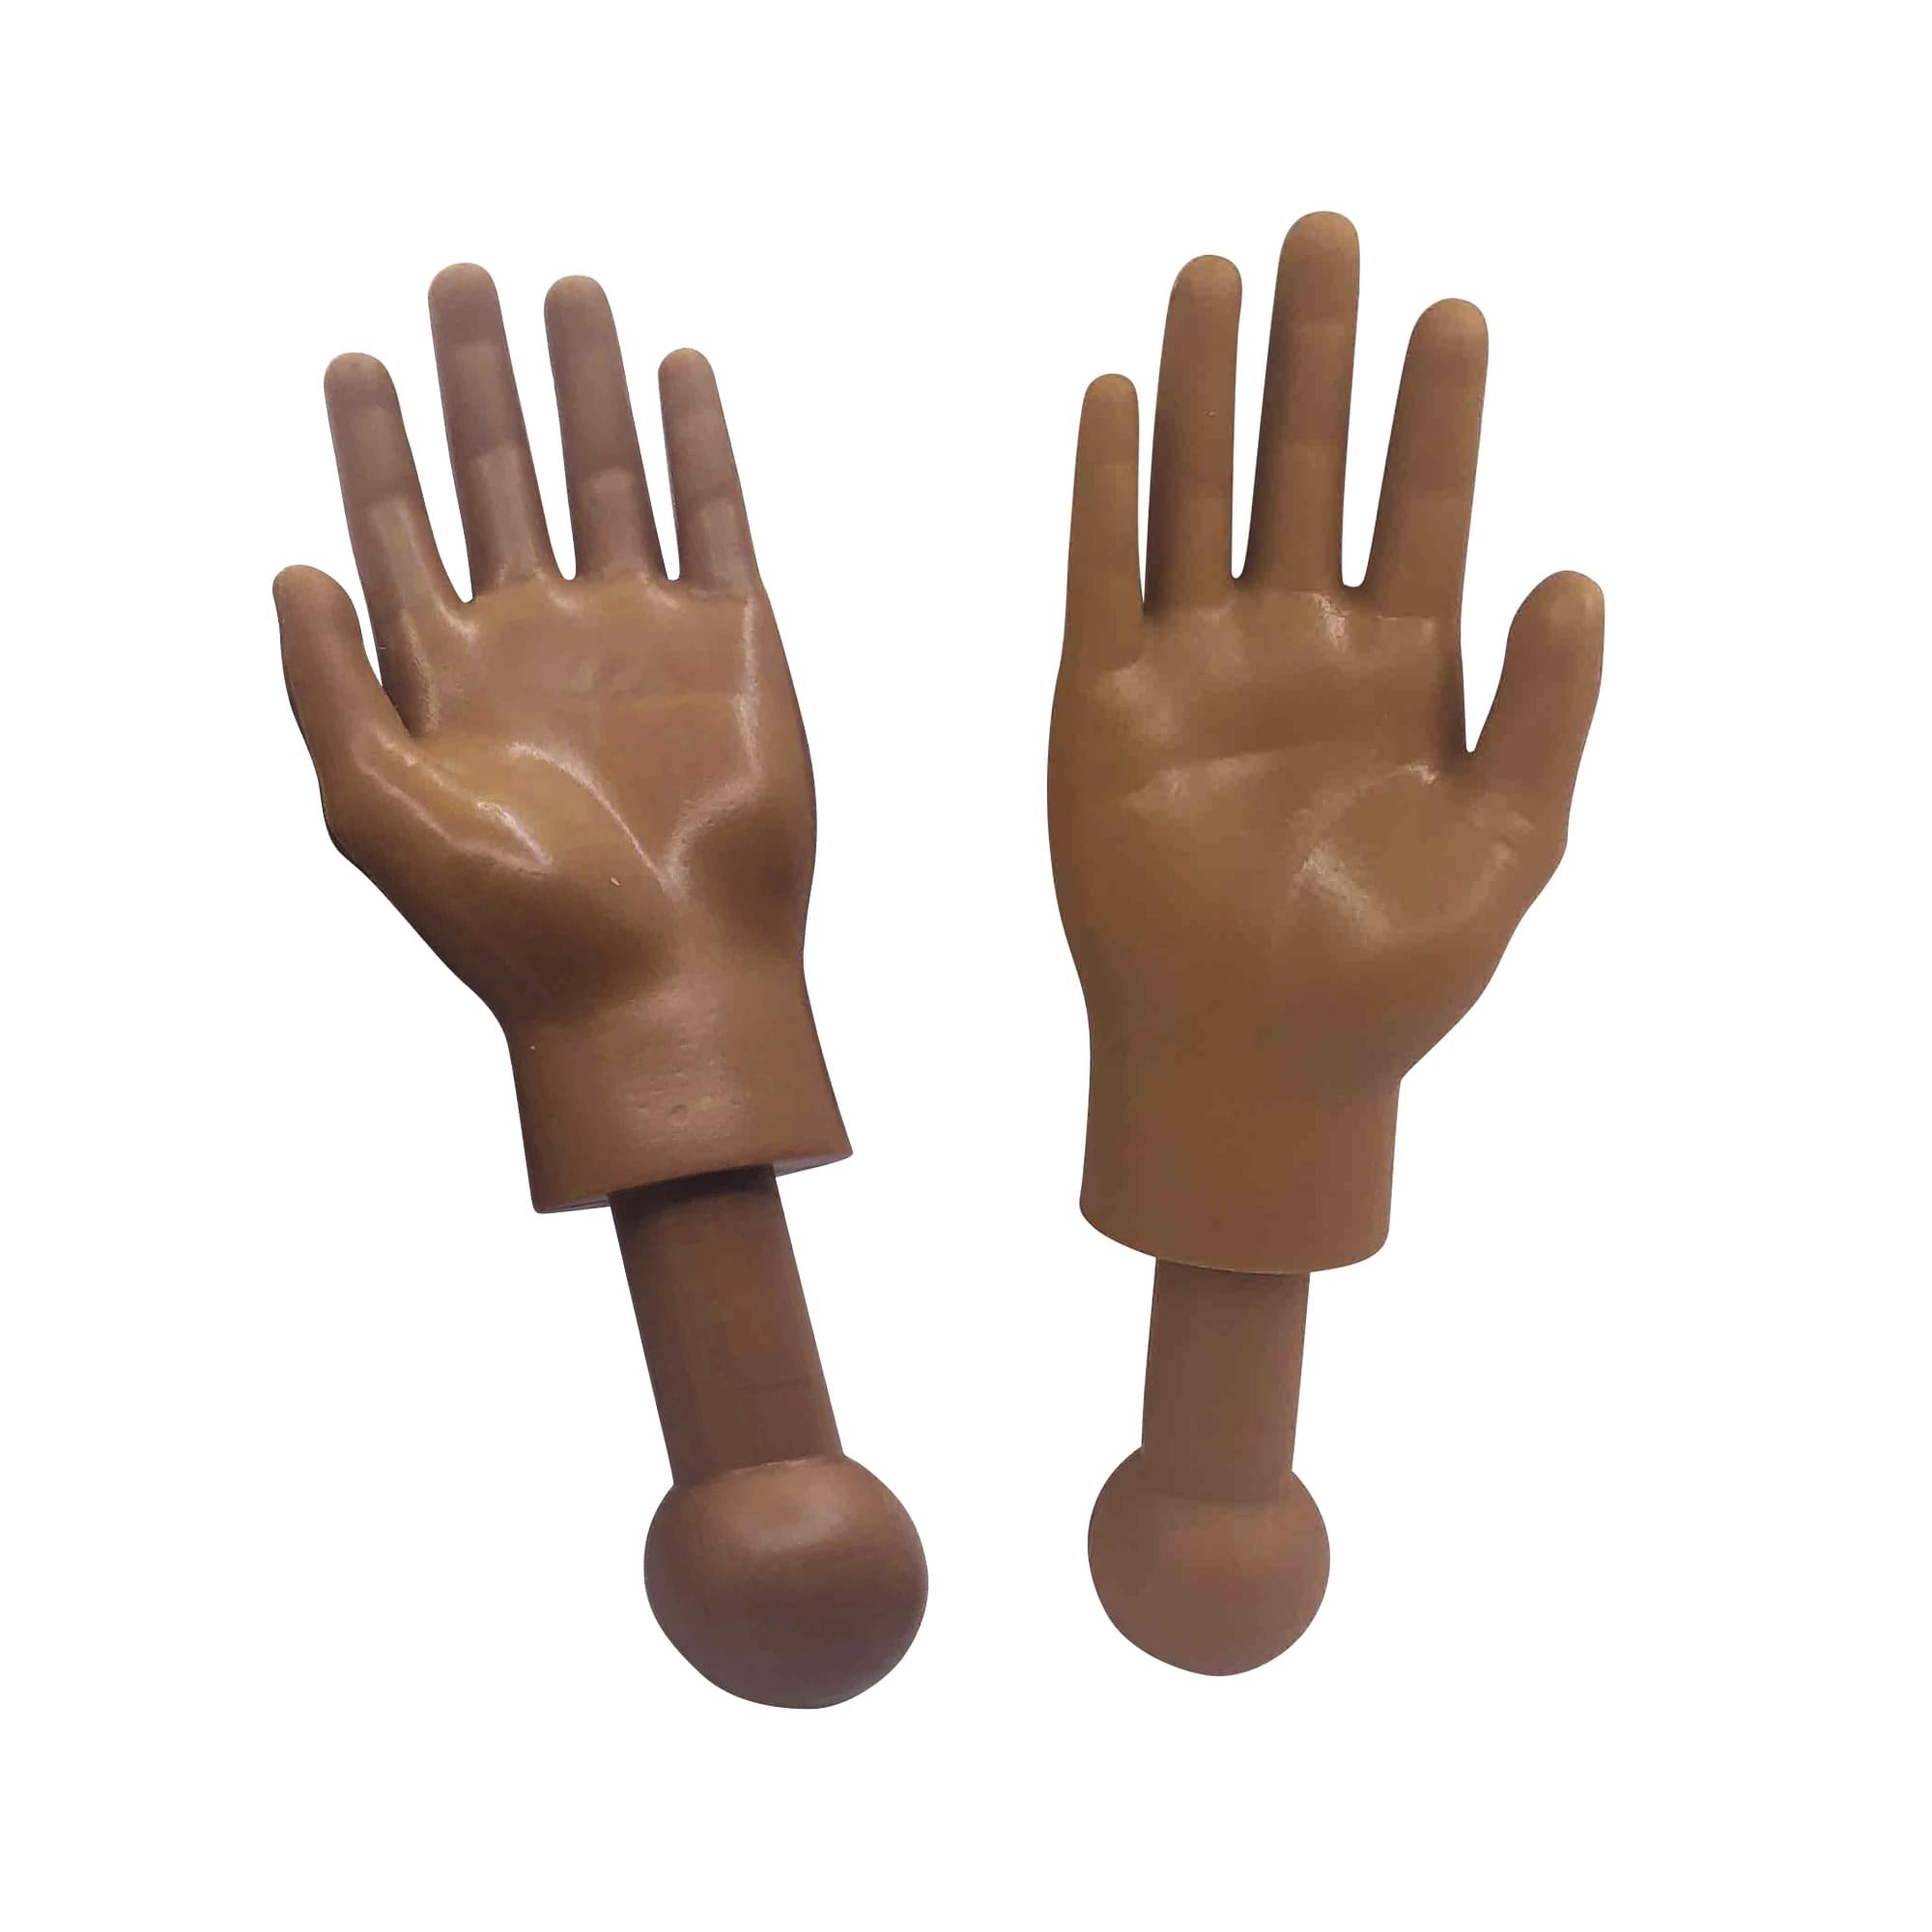 Tiny Hands 4.5 Novelty Toys , Left And Right Hands, Deep Brown